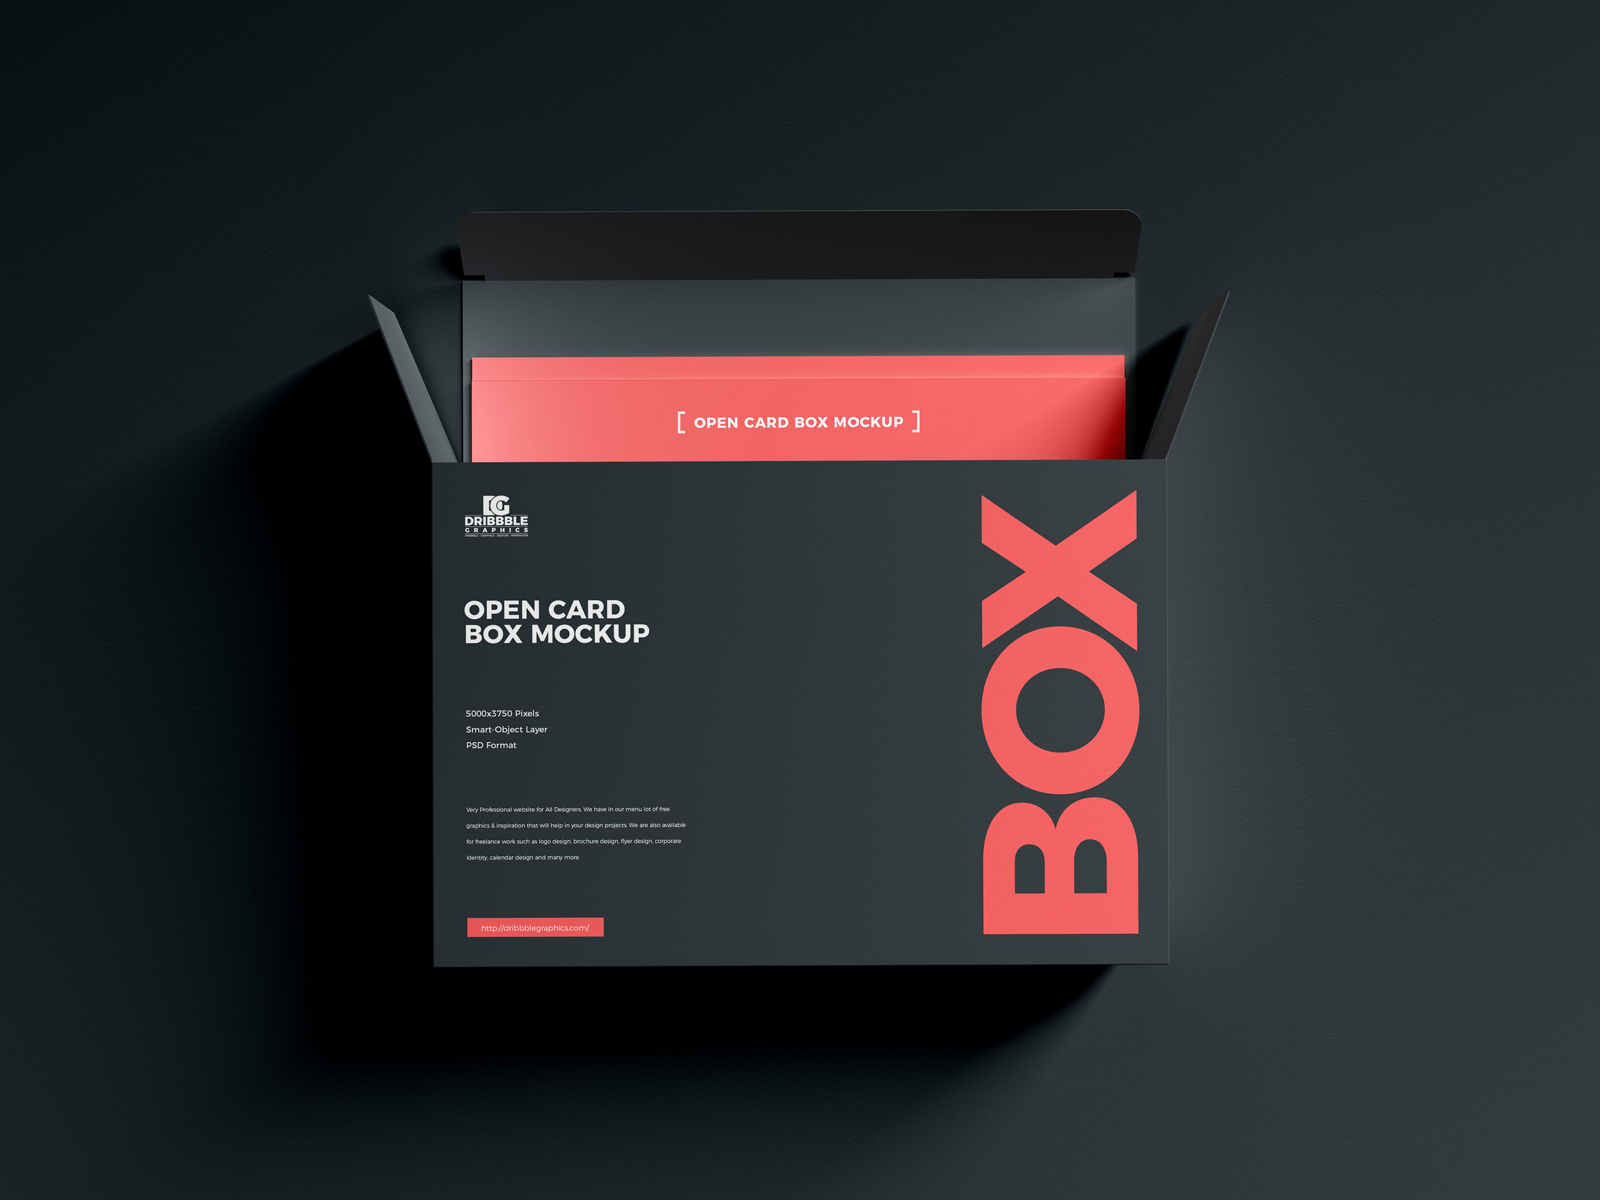 Download Free Open Card Box Mockup by Jessica Elle on Dribbble